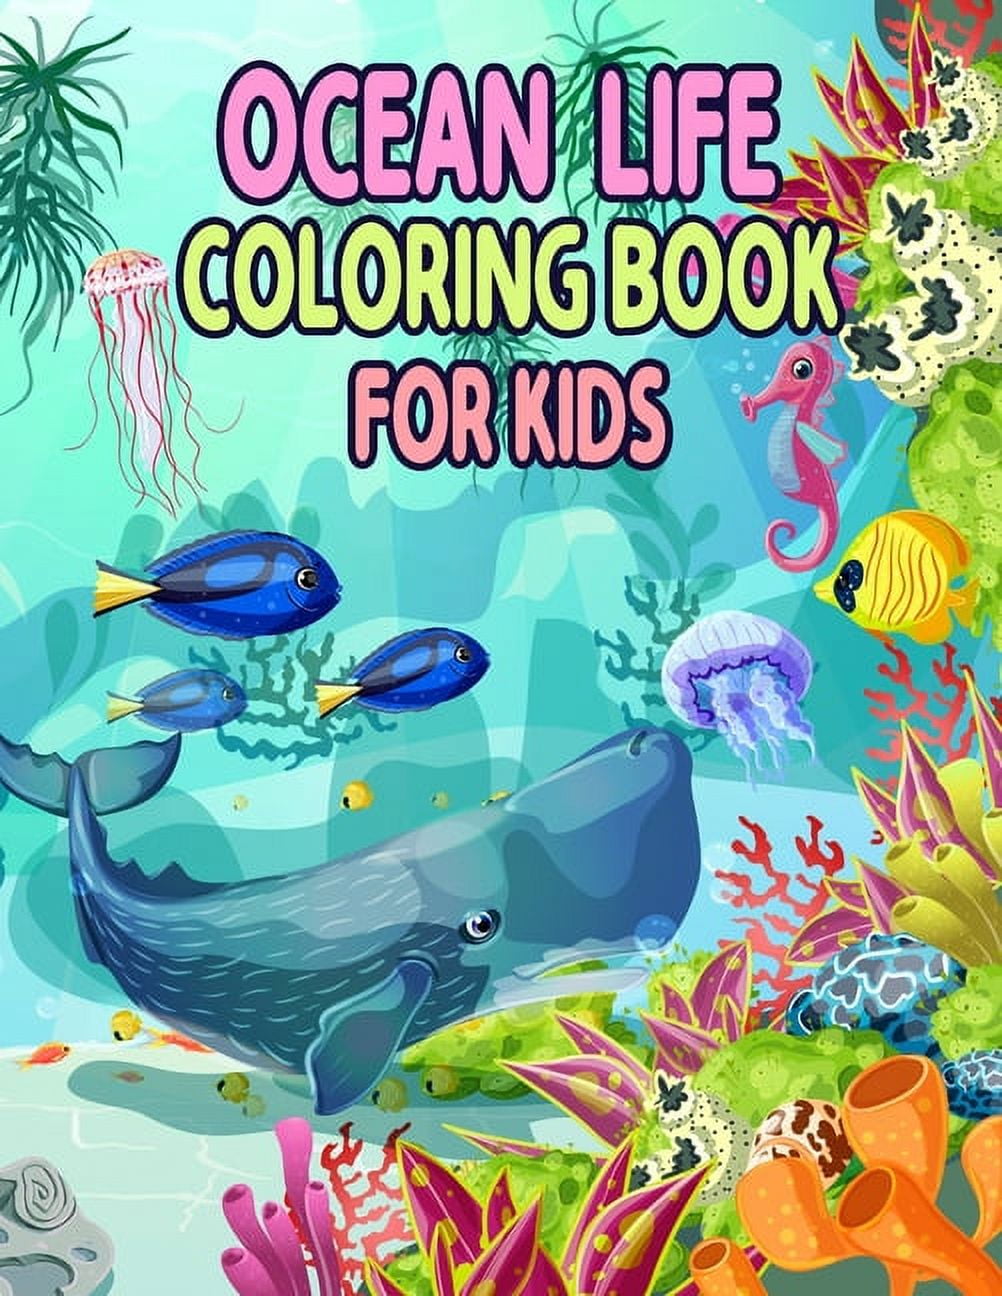 Ocean Life Coloring Book for Kids: Ocean Kids Coloring Book, Sea Creatures Life Kids Coloring Book, Relaxation with Sea Animals, Marine Life, Best Relaxing Coloring Book [Book]